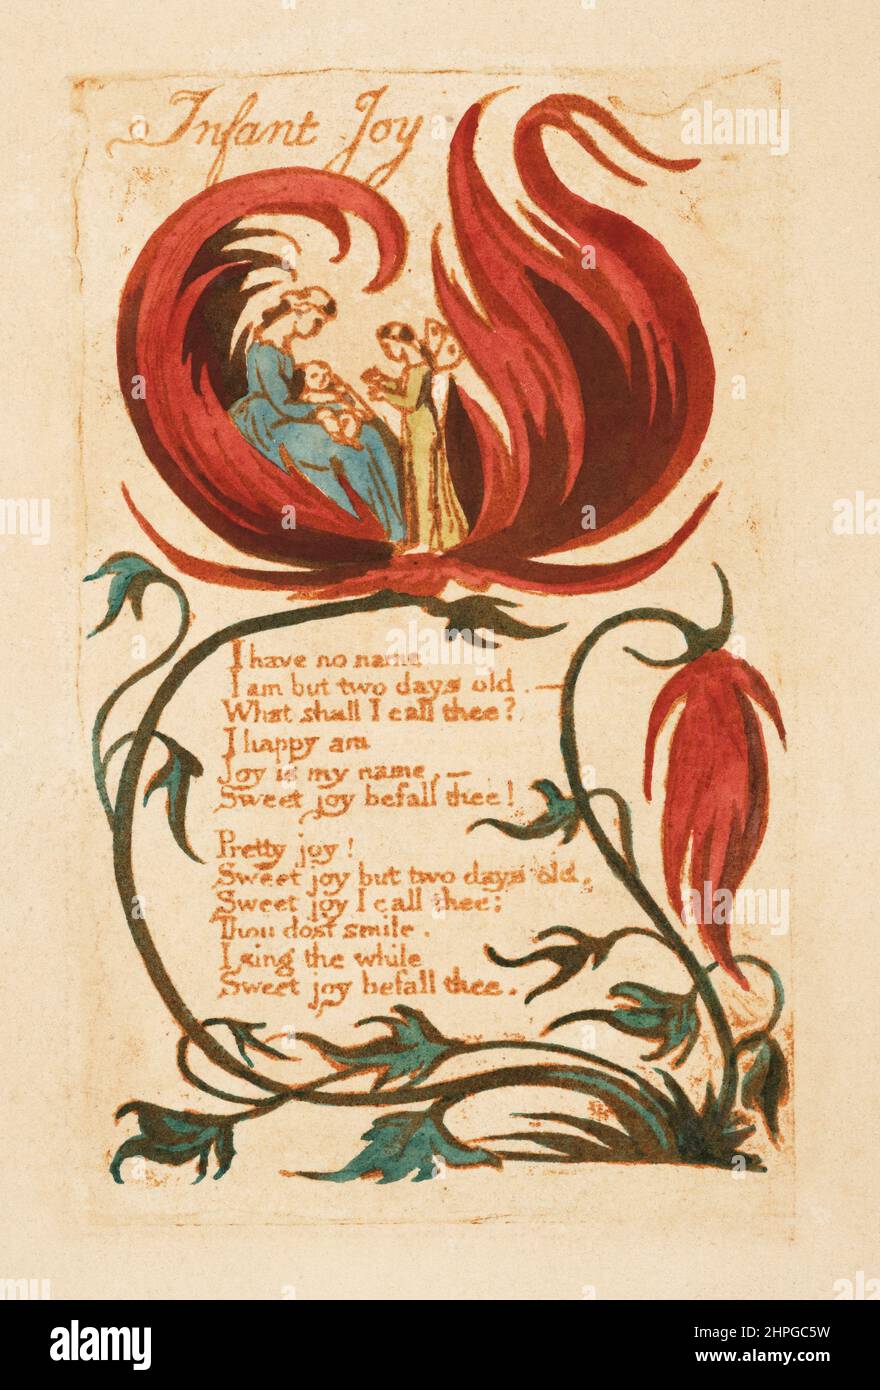 Illustration for Infant Joy, from Songs of Innocence first published in 1799 by English poet and artist William Blake, 1757 - 1827. Stock Photo